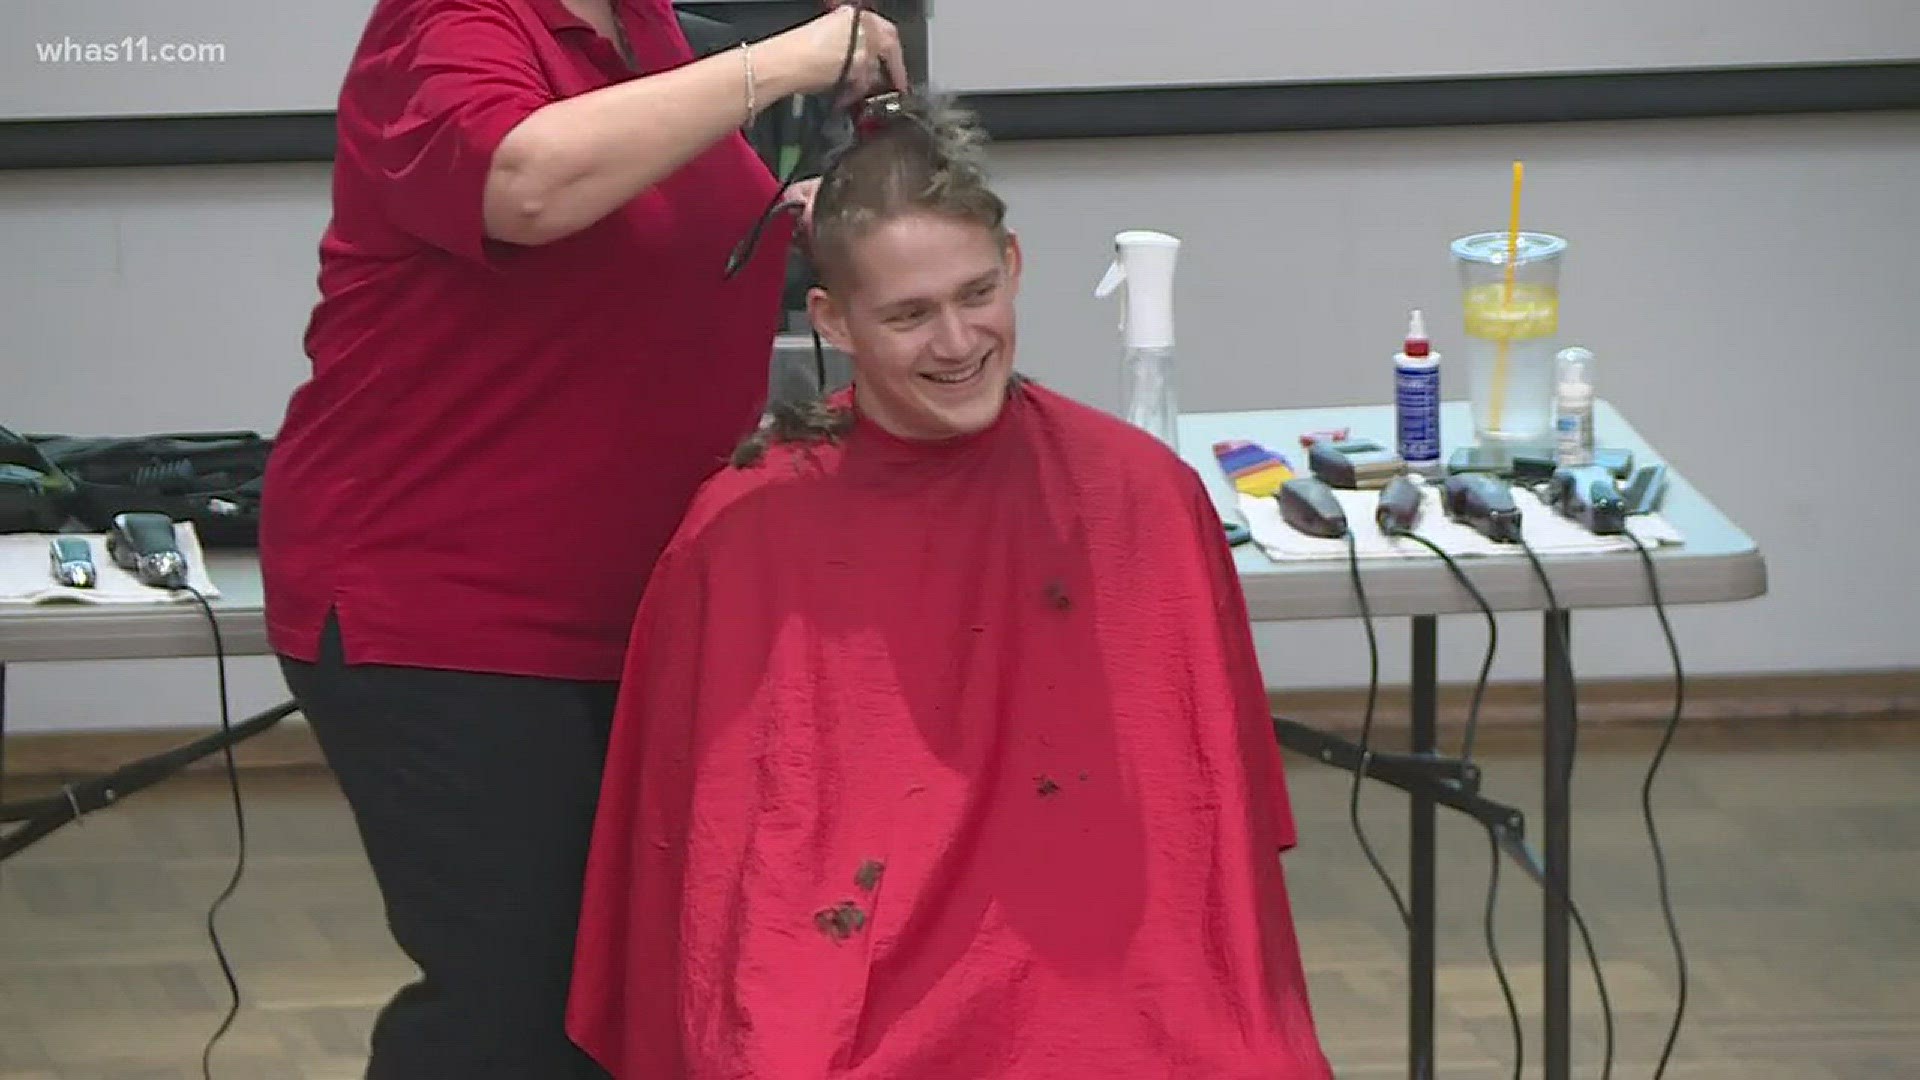 Students at UofL shaving their heads today to support cancer research.